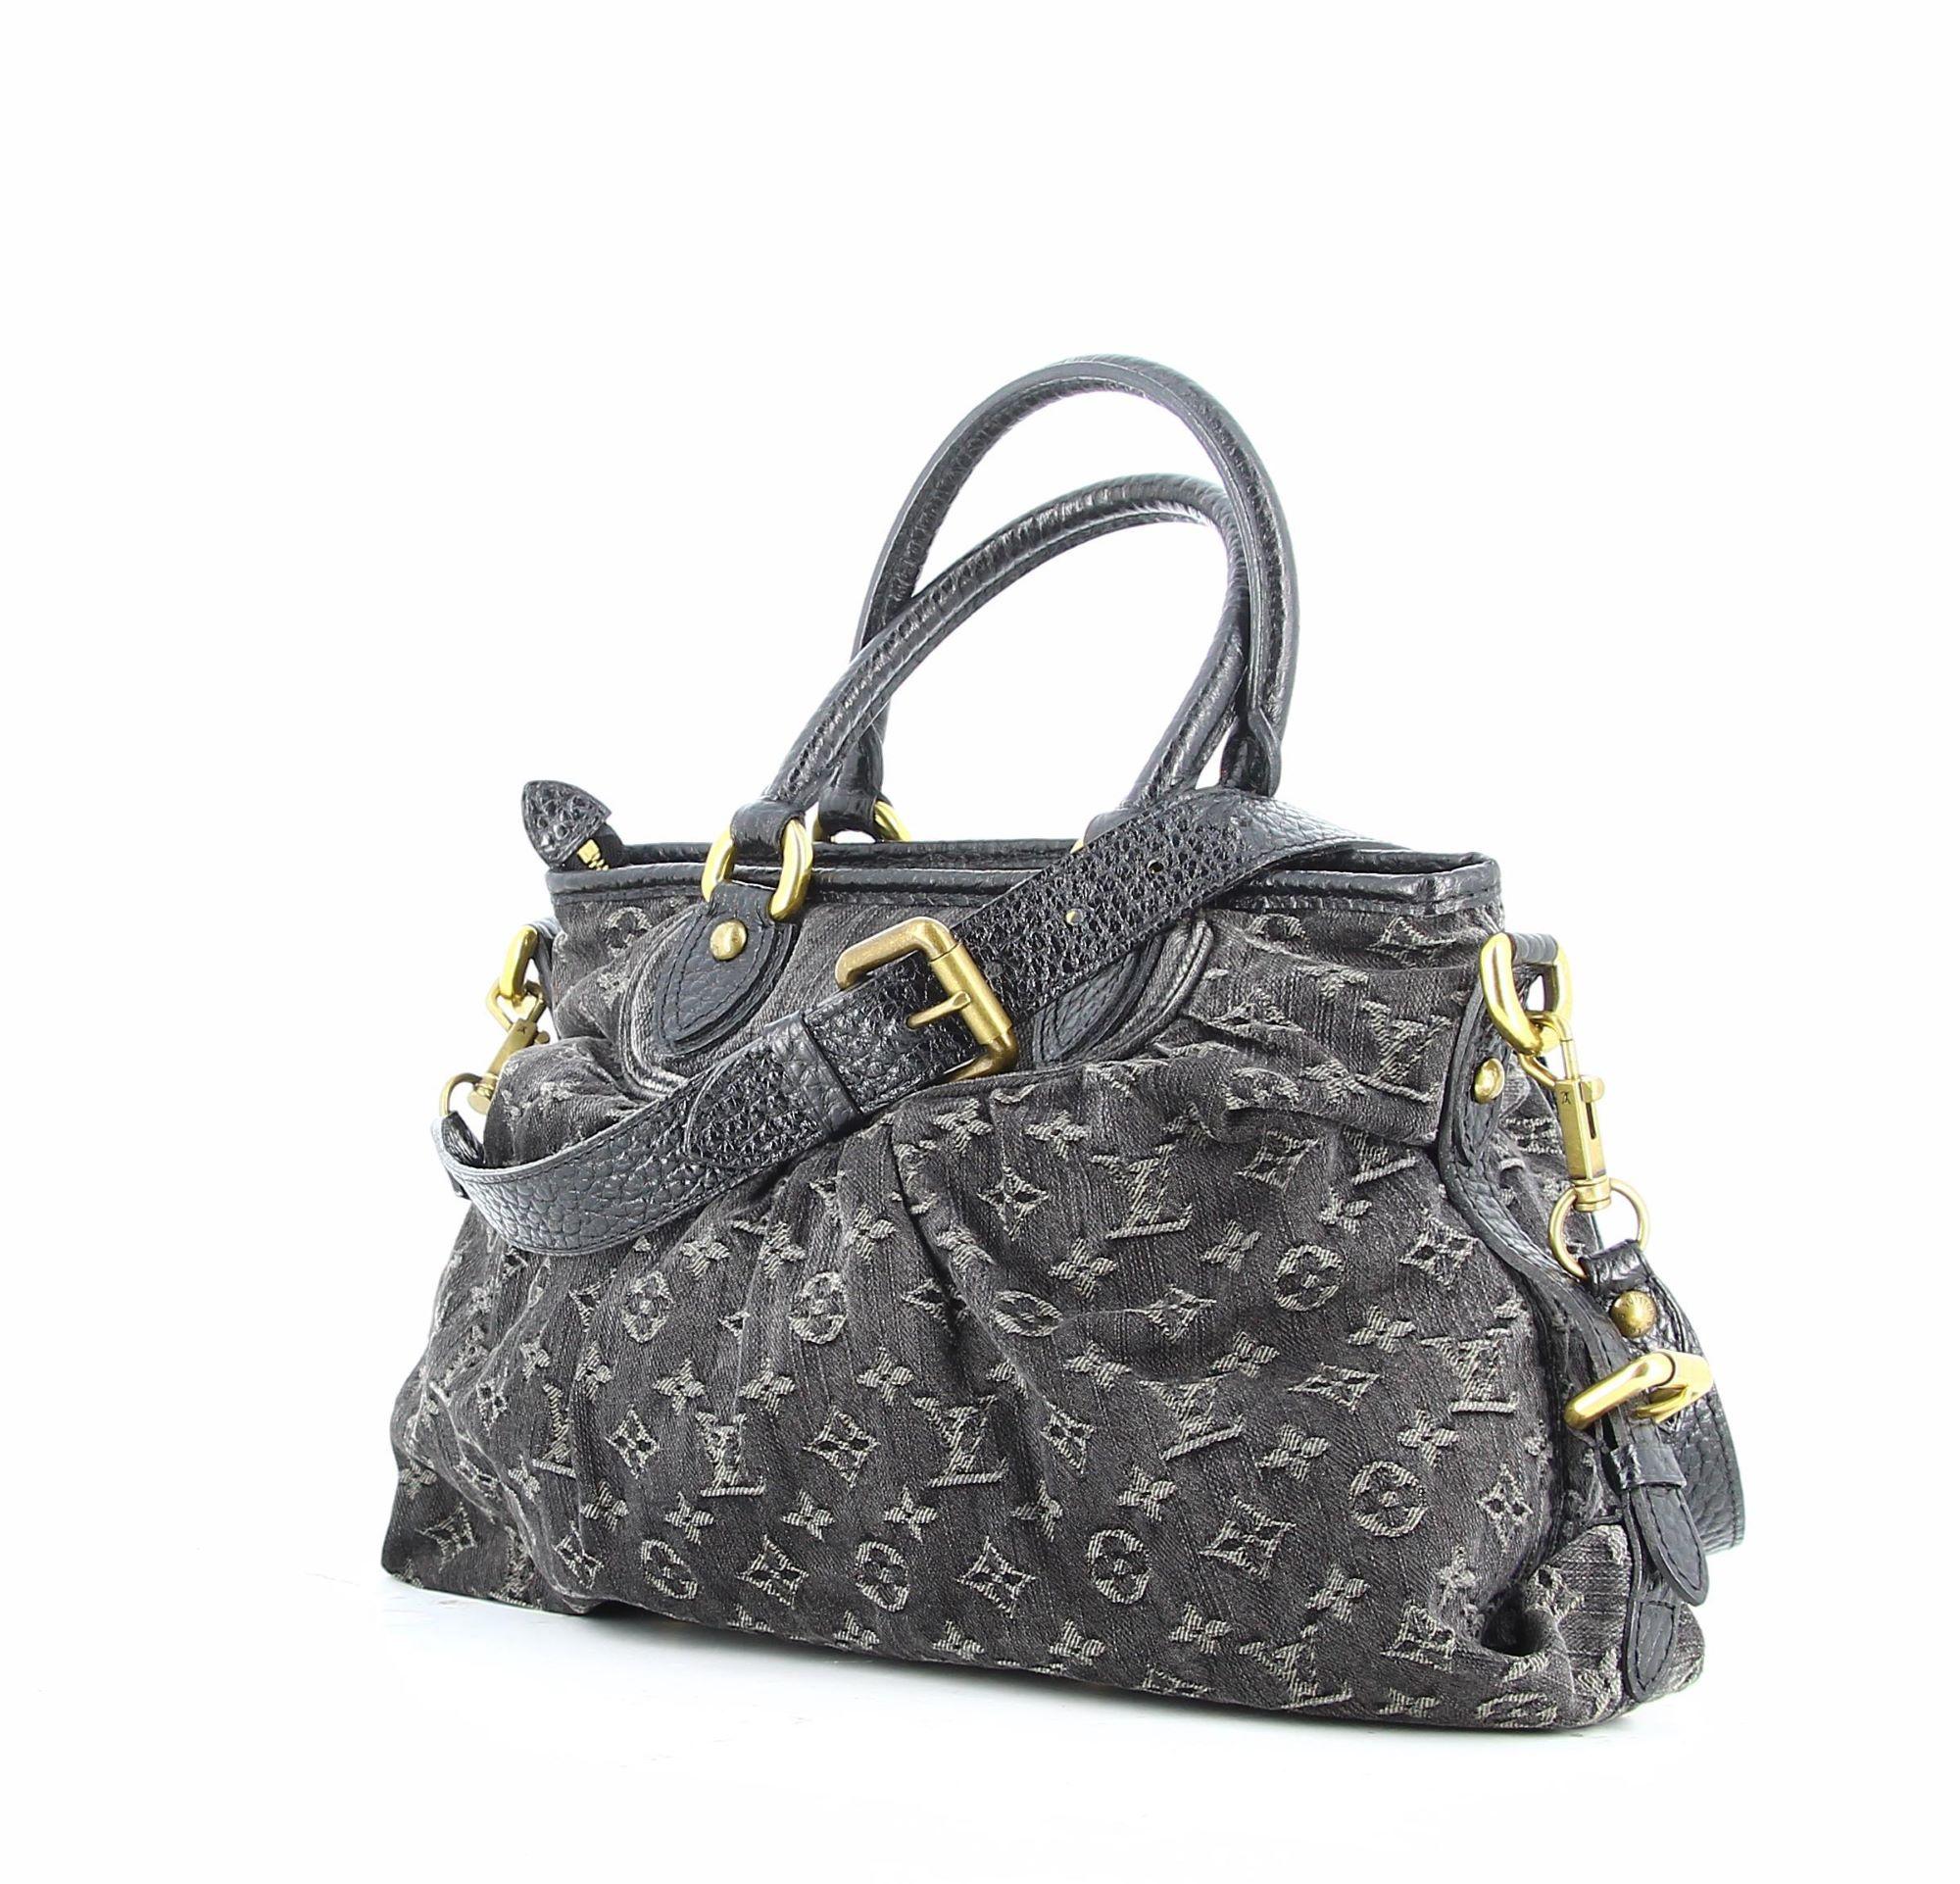 Louis Vuitton Neo Caby Monogram bag in black denim
Good condition. Shows some slight signs of use and wear over time.
This Louis Vuitton Neo Cabby Denim MM bag, crafted in black monogram denim, features two rolled leather top handles, pleated